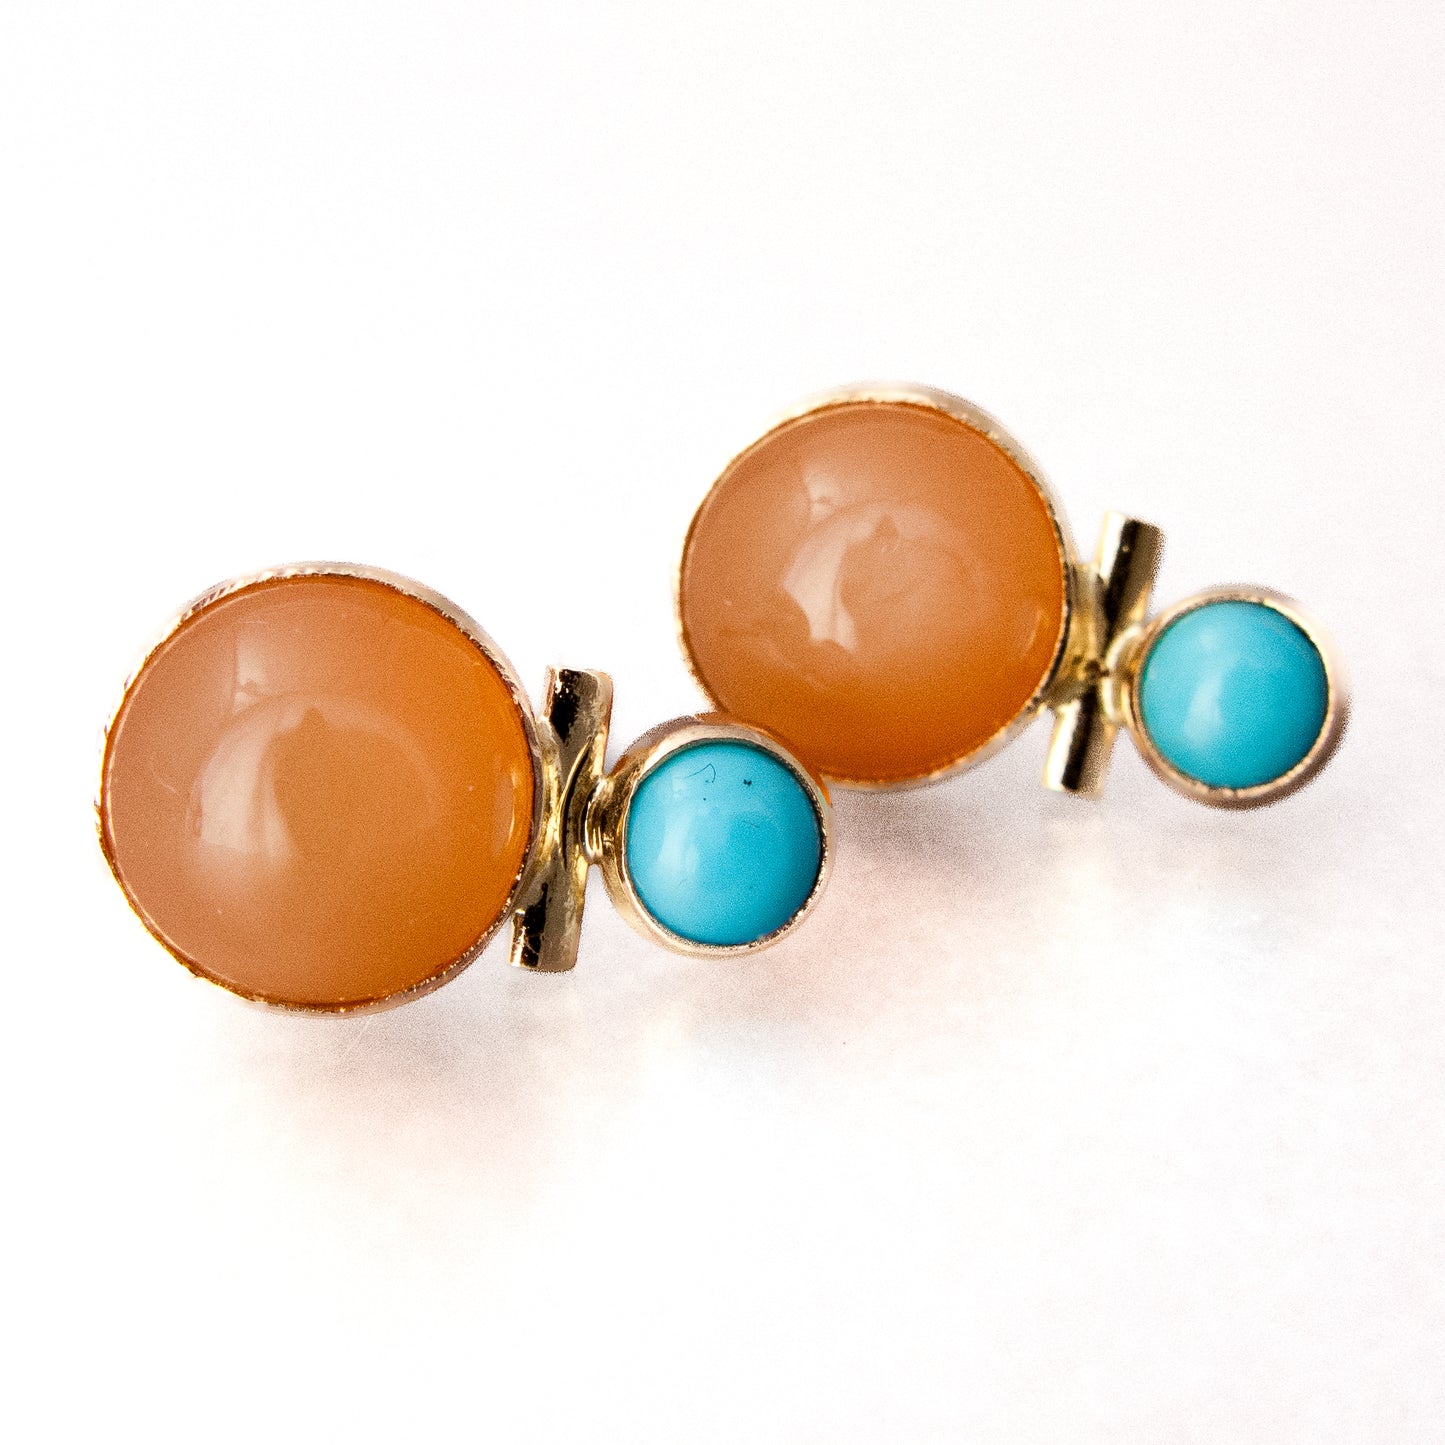 Peach Moonstone and Turquoise Stud Earrings in 14k Yellow Gold Bezels